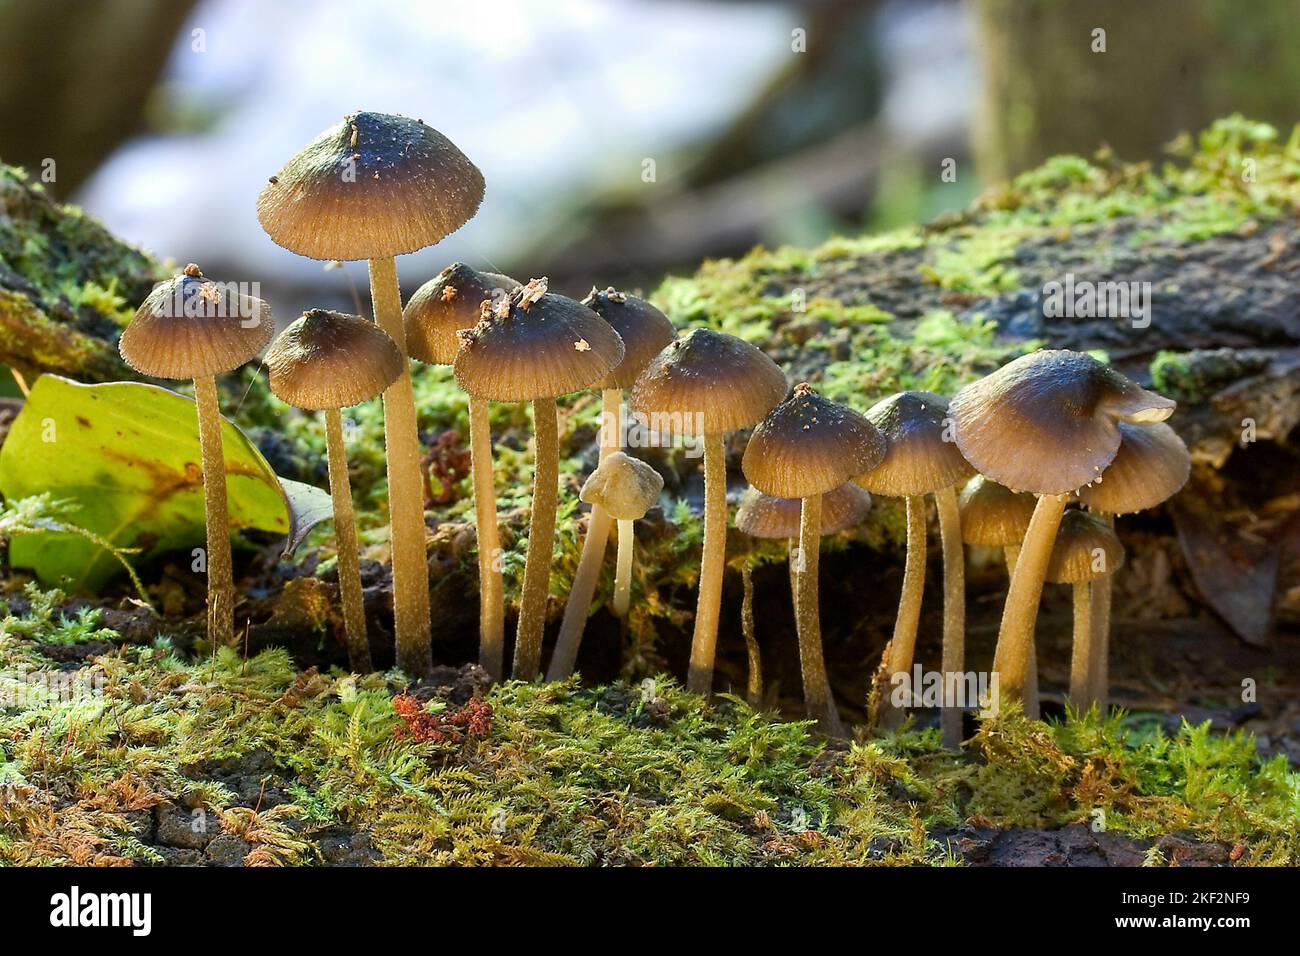 Wild mushrooms are sourced as food but can also be toxic. Also featured in many fairytales. Stock Photo